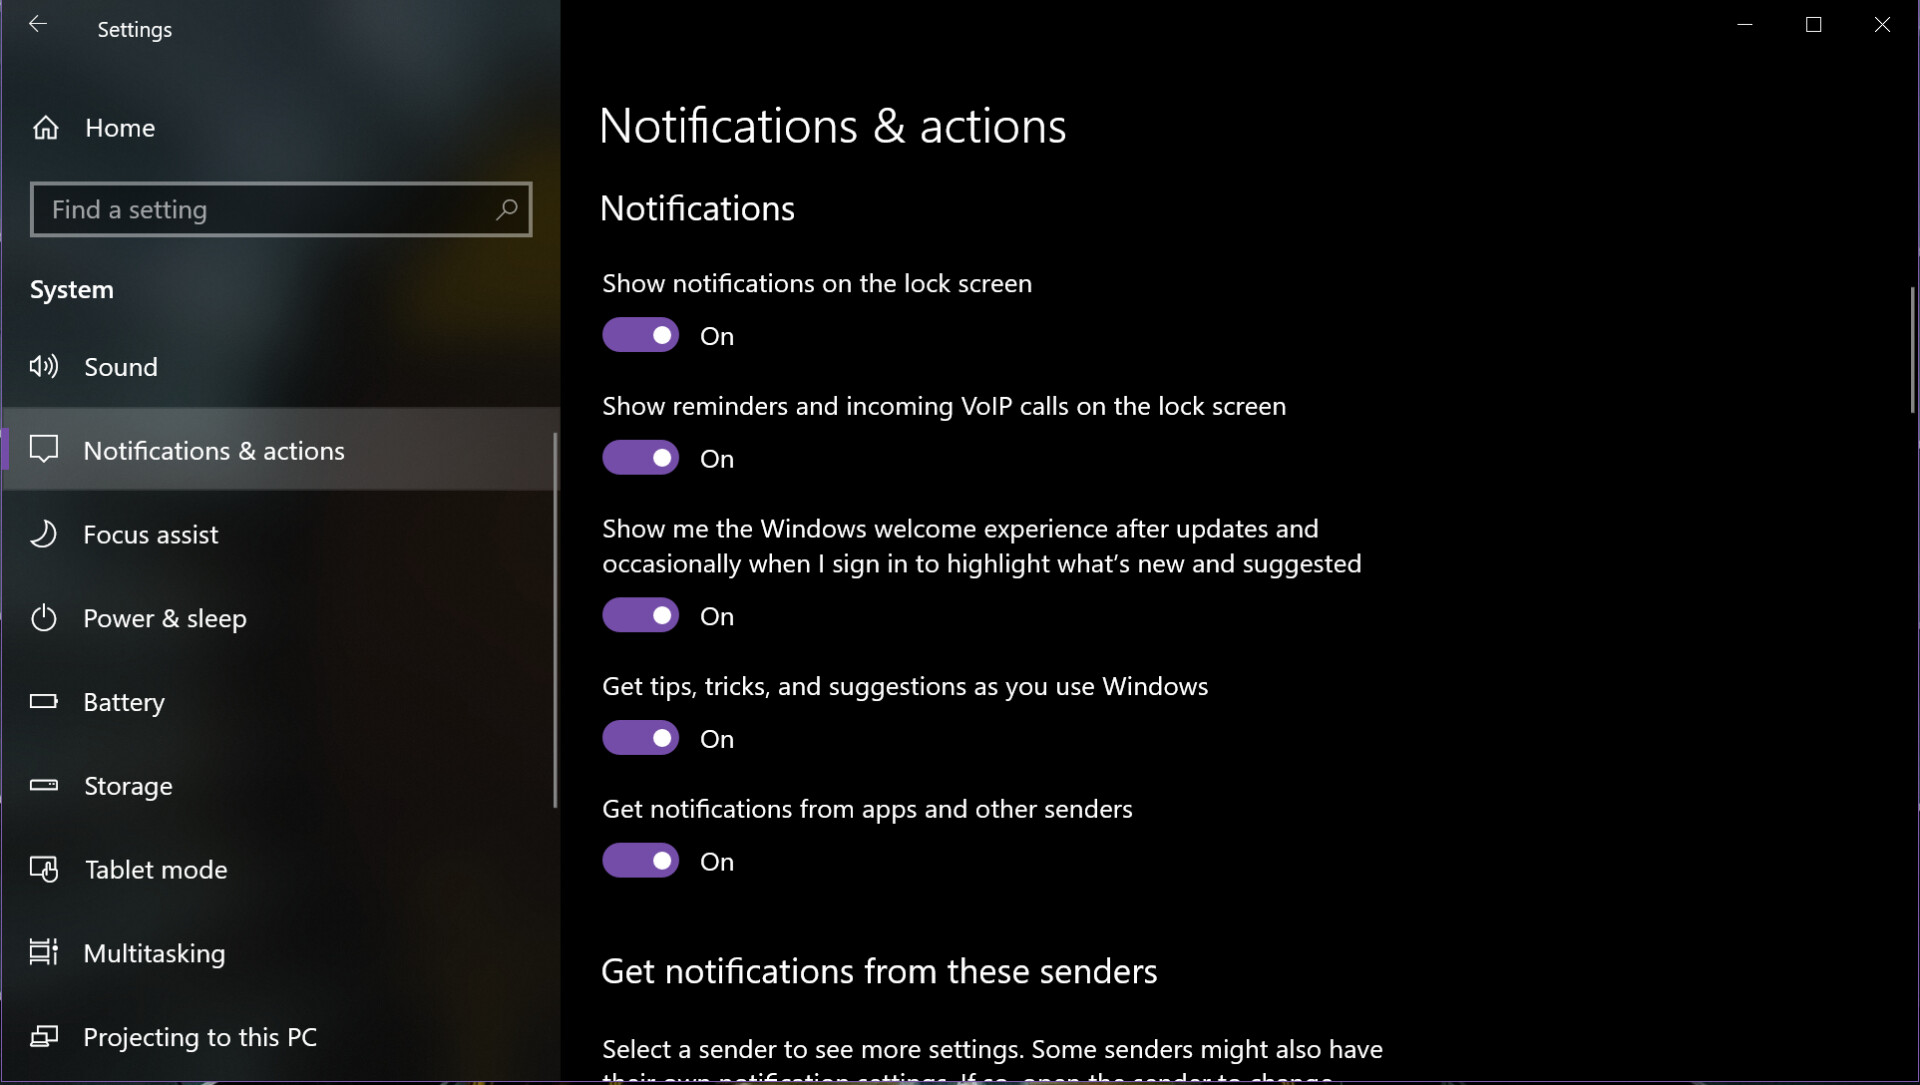 Windows 10 notifications and actions panel - How to use notifications in Windows 10